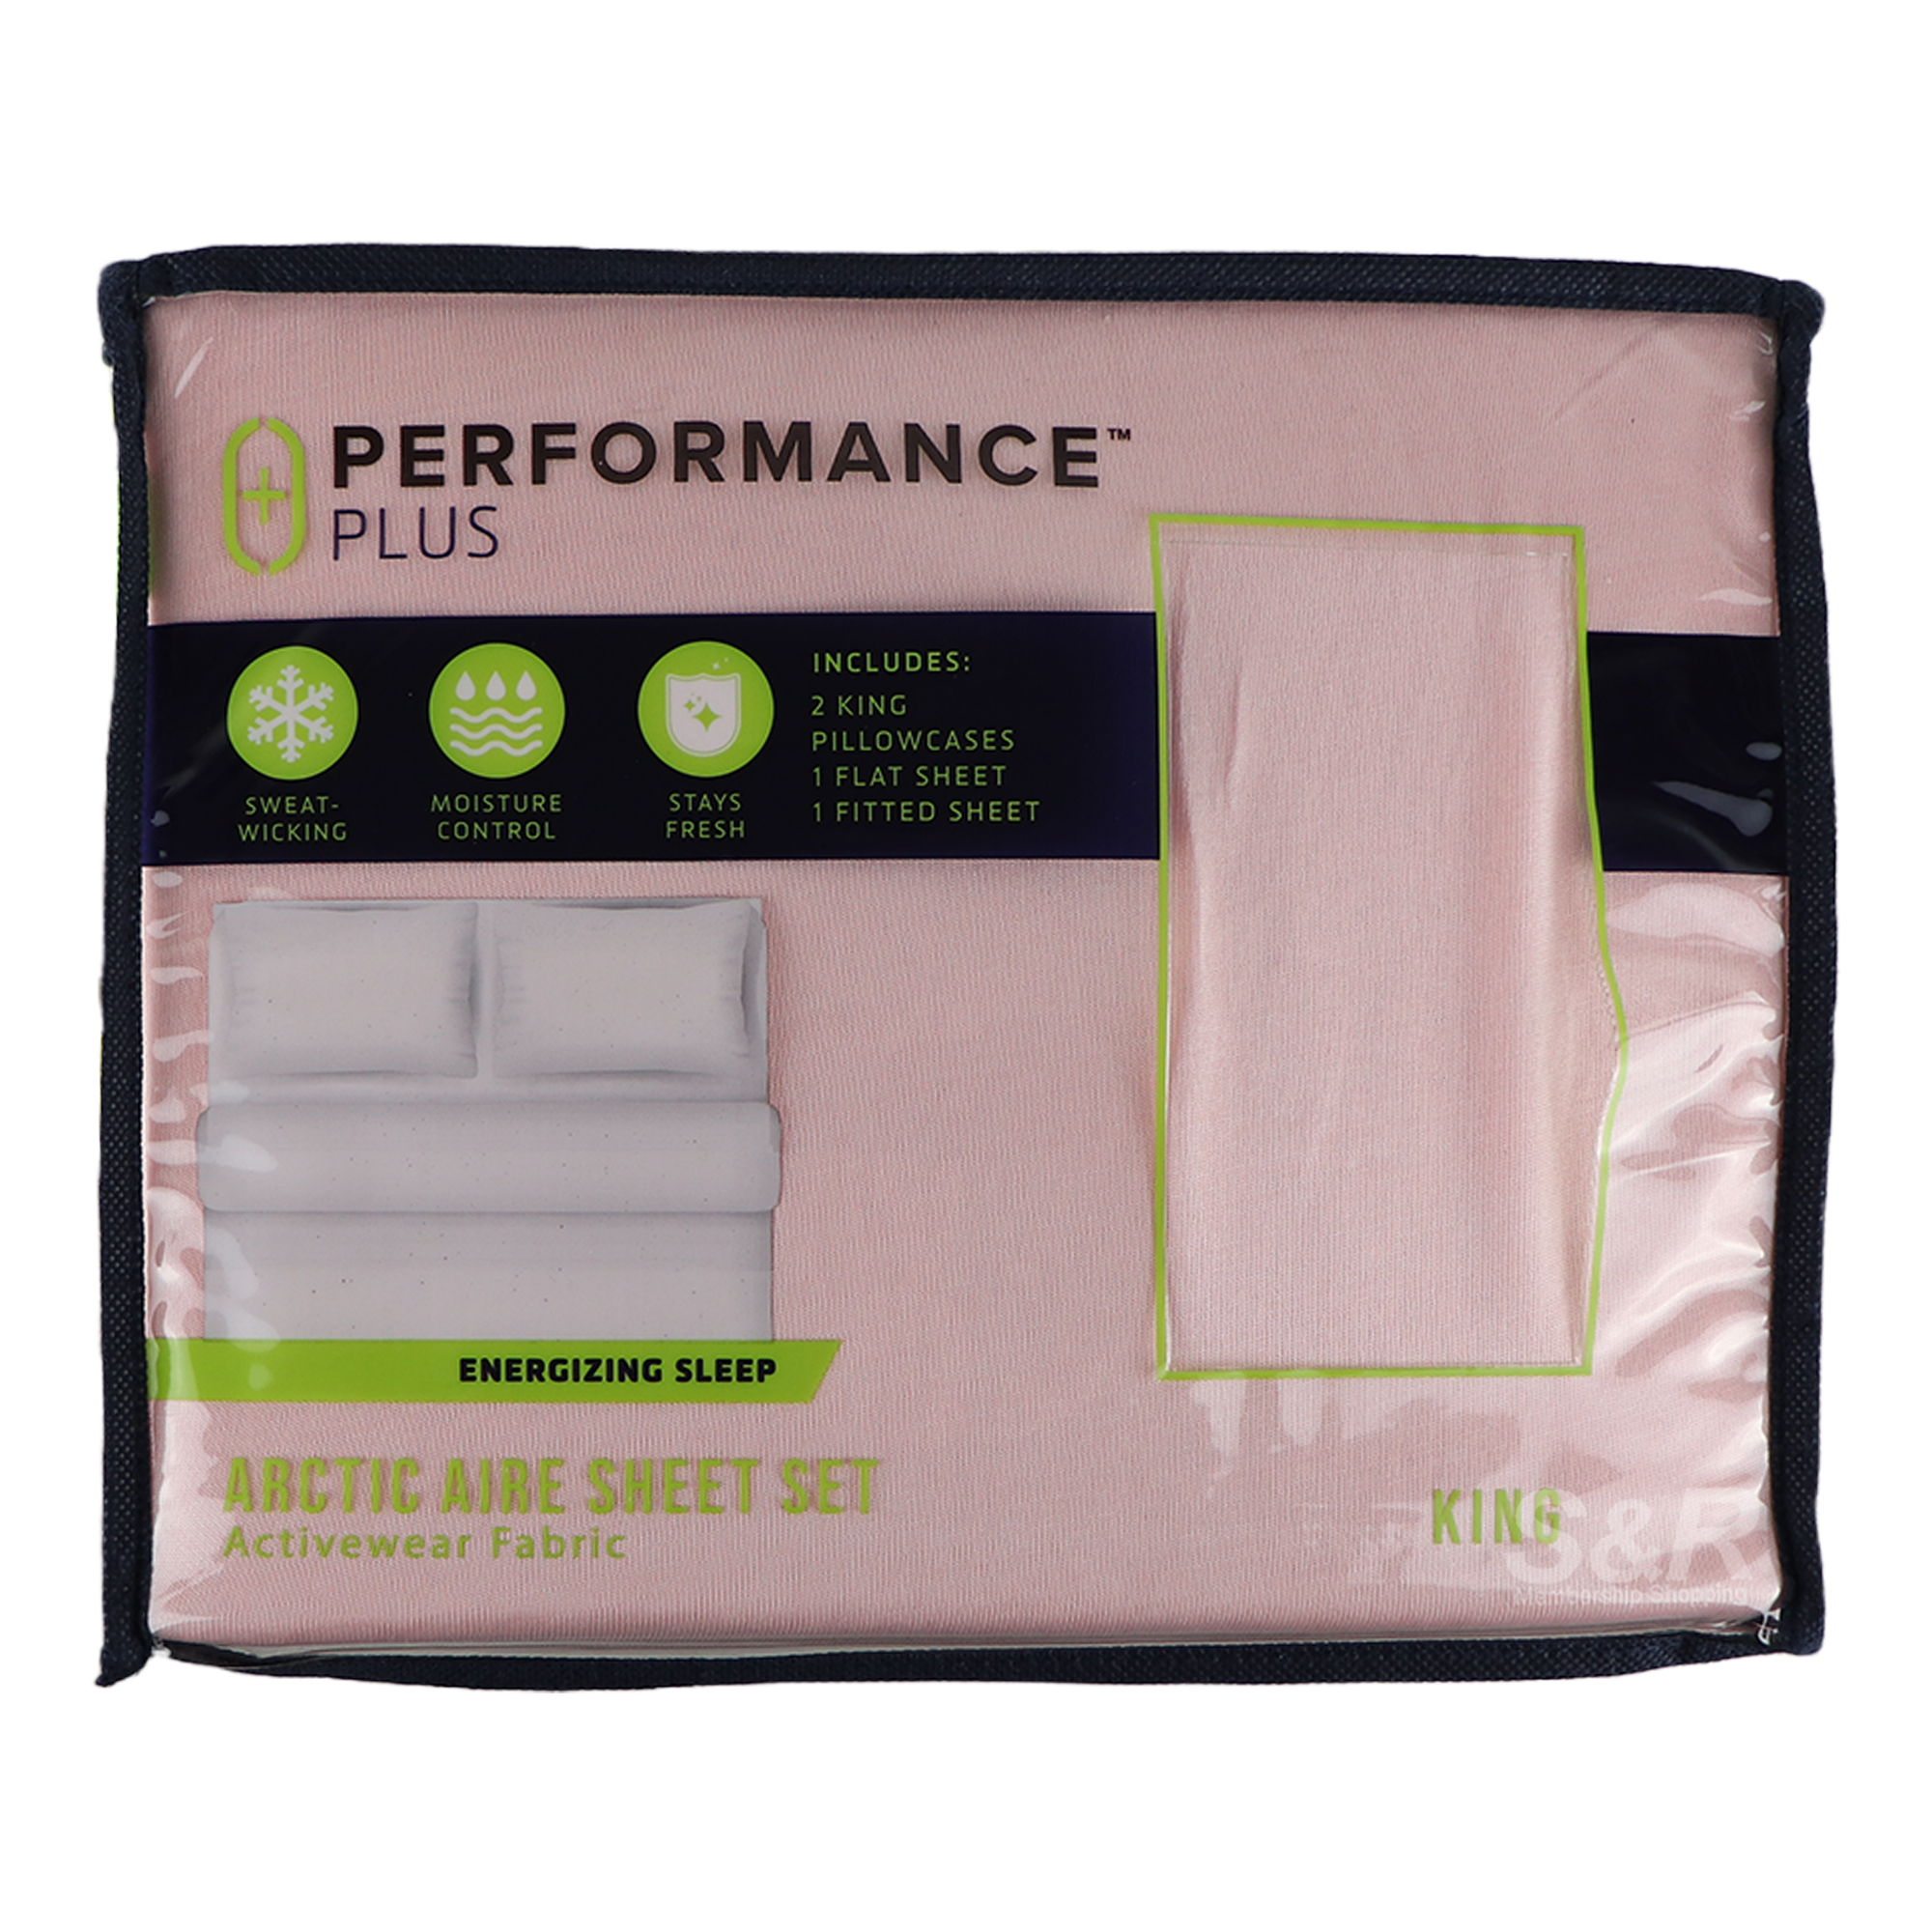 Arctic Aire Sheet Performance Fabric King Set